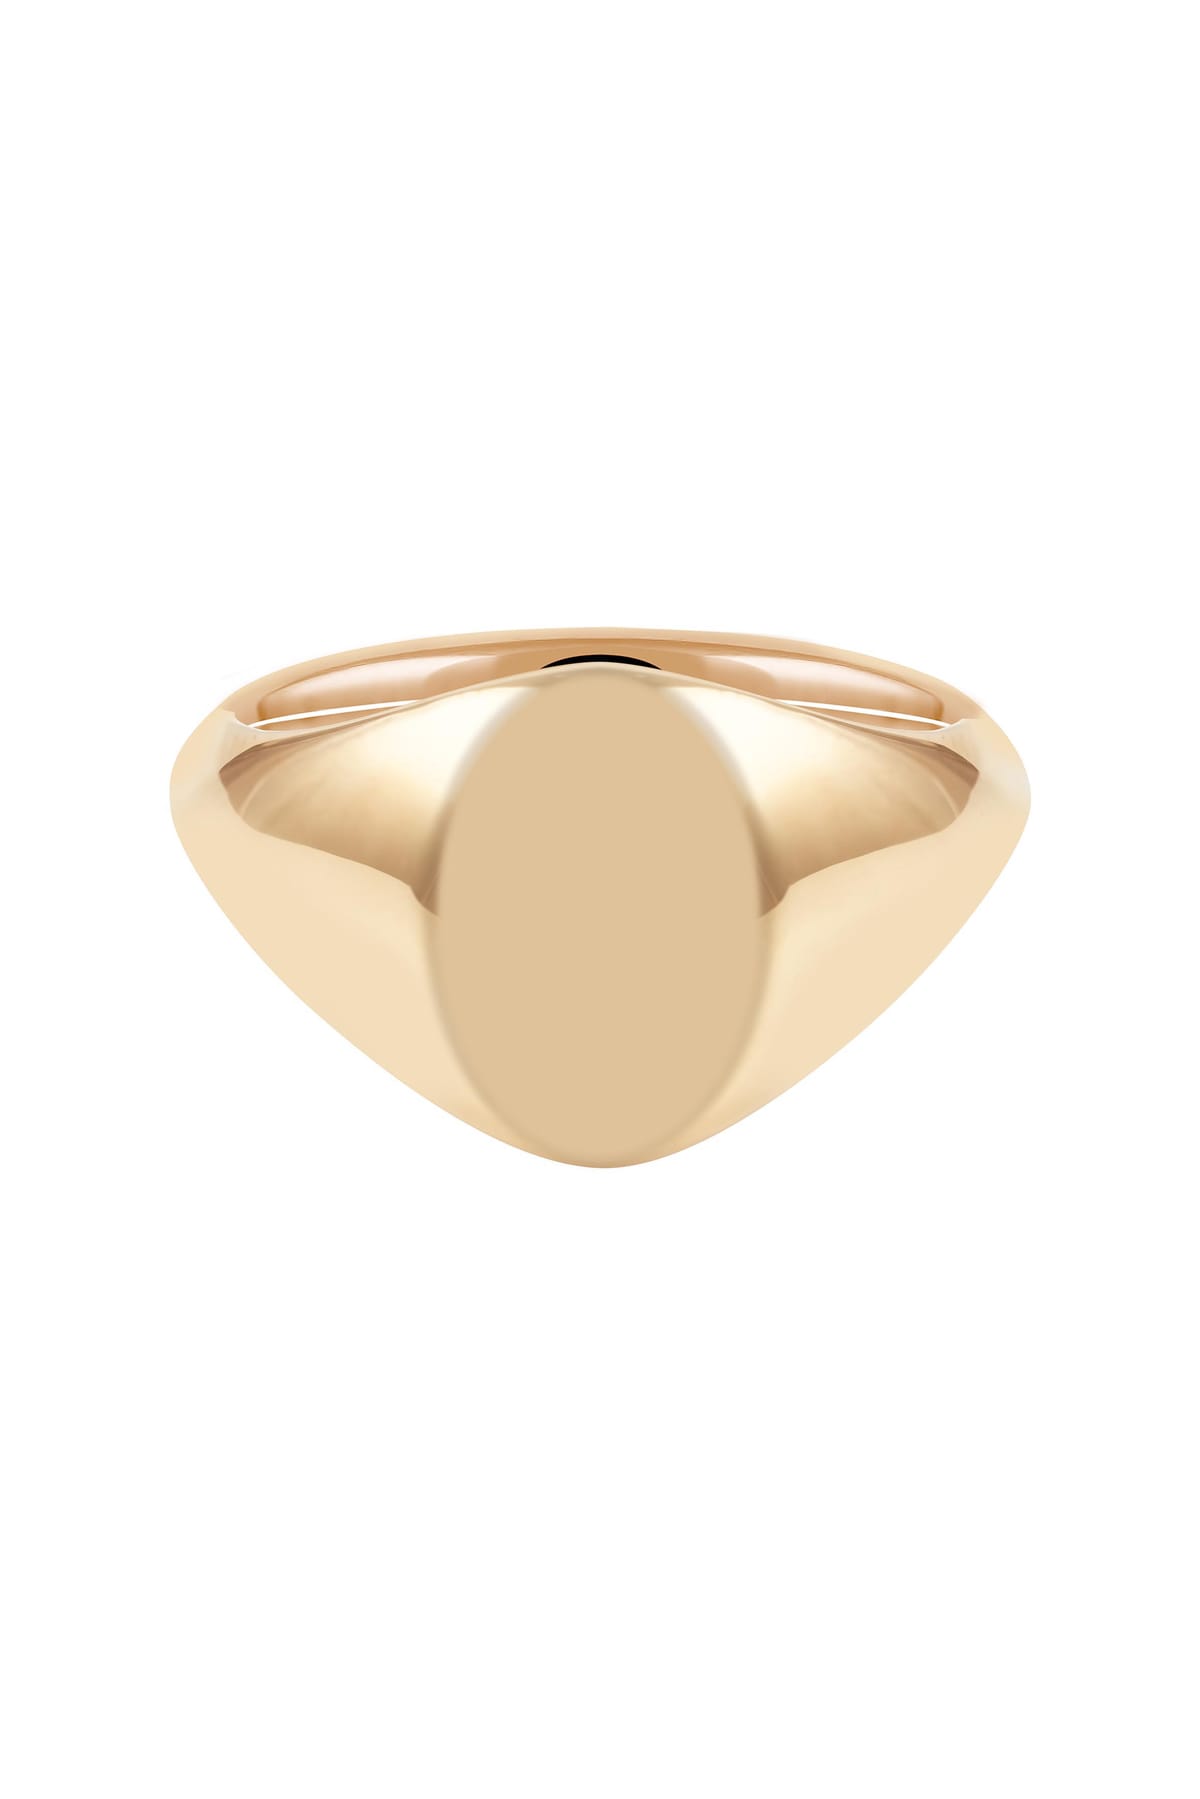 Fine Oval Flat Top Signet Ring set in 9ct Yellow Gold available at LeGassick Diamonds and Jewellery Gold Coast, Australia.